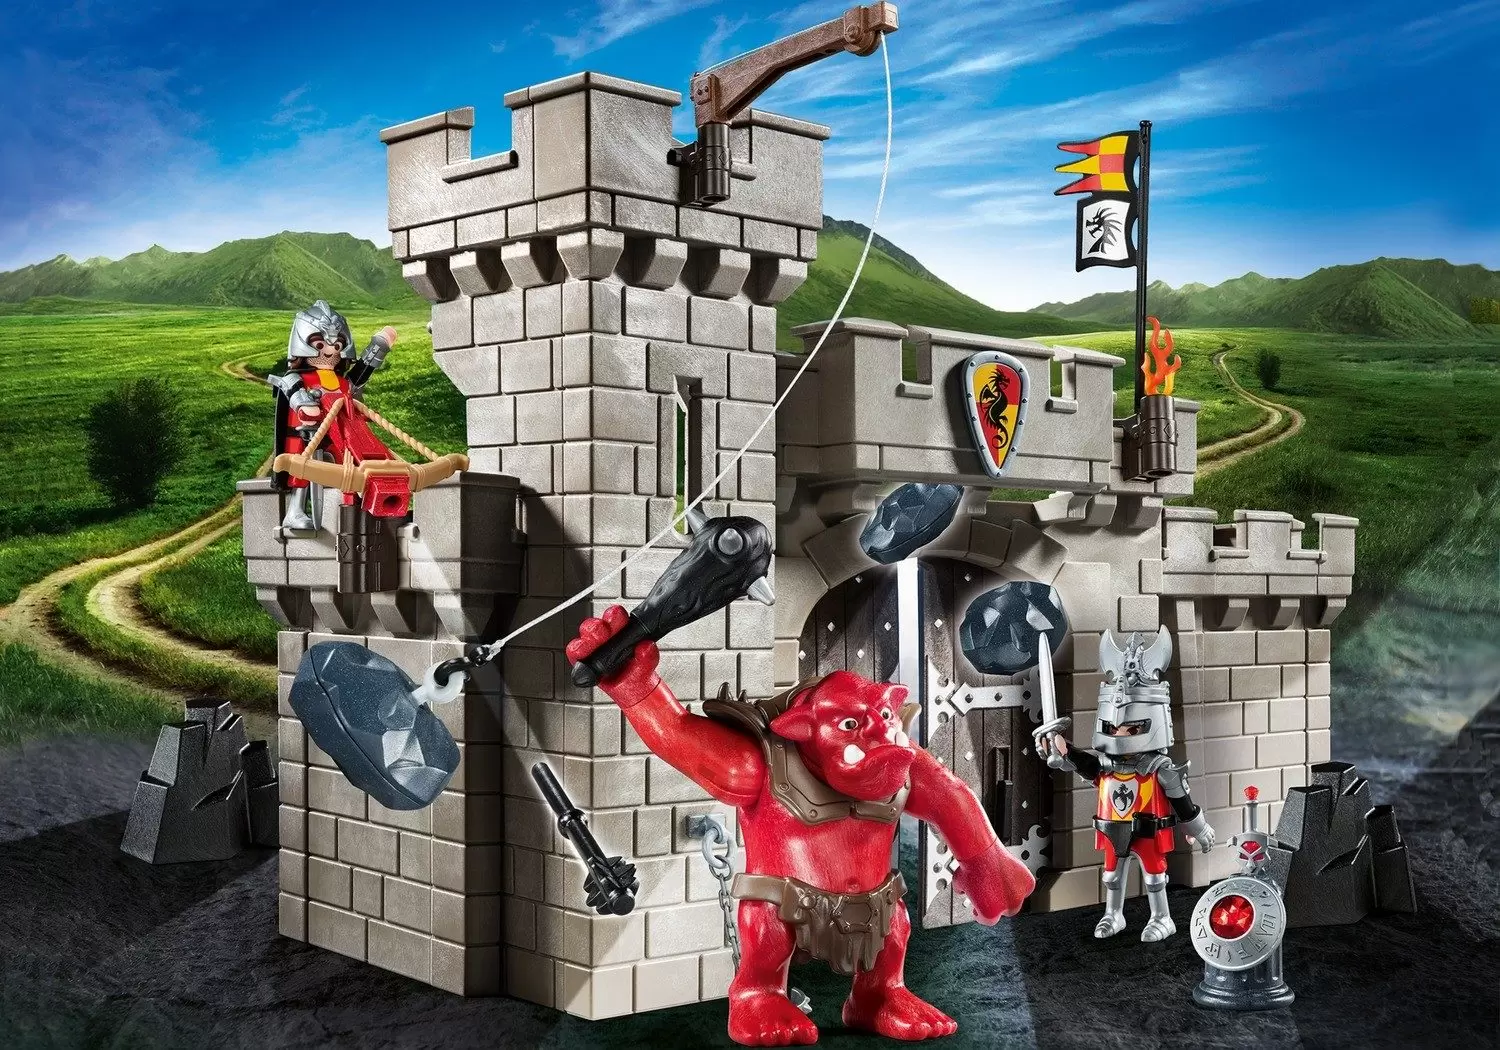 Playmobil Middle-Ages - Castle Gate with red troll